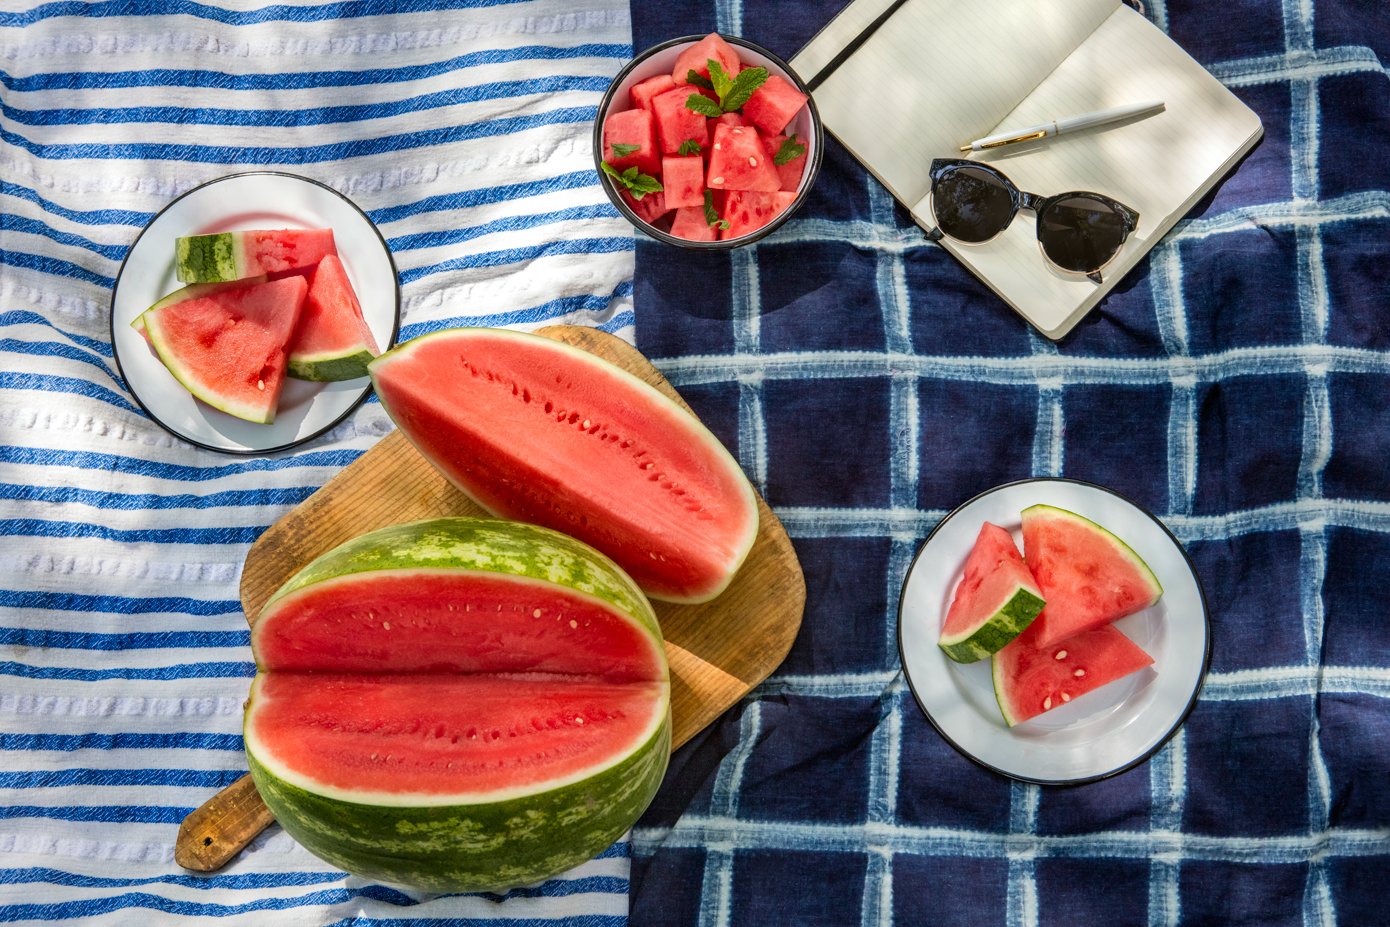 Whole Foods Market Summer Campaign